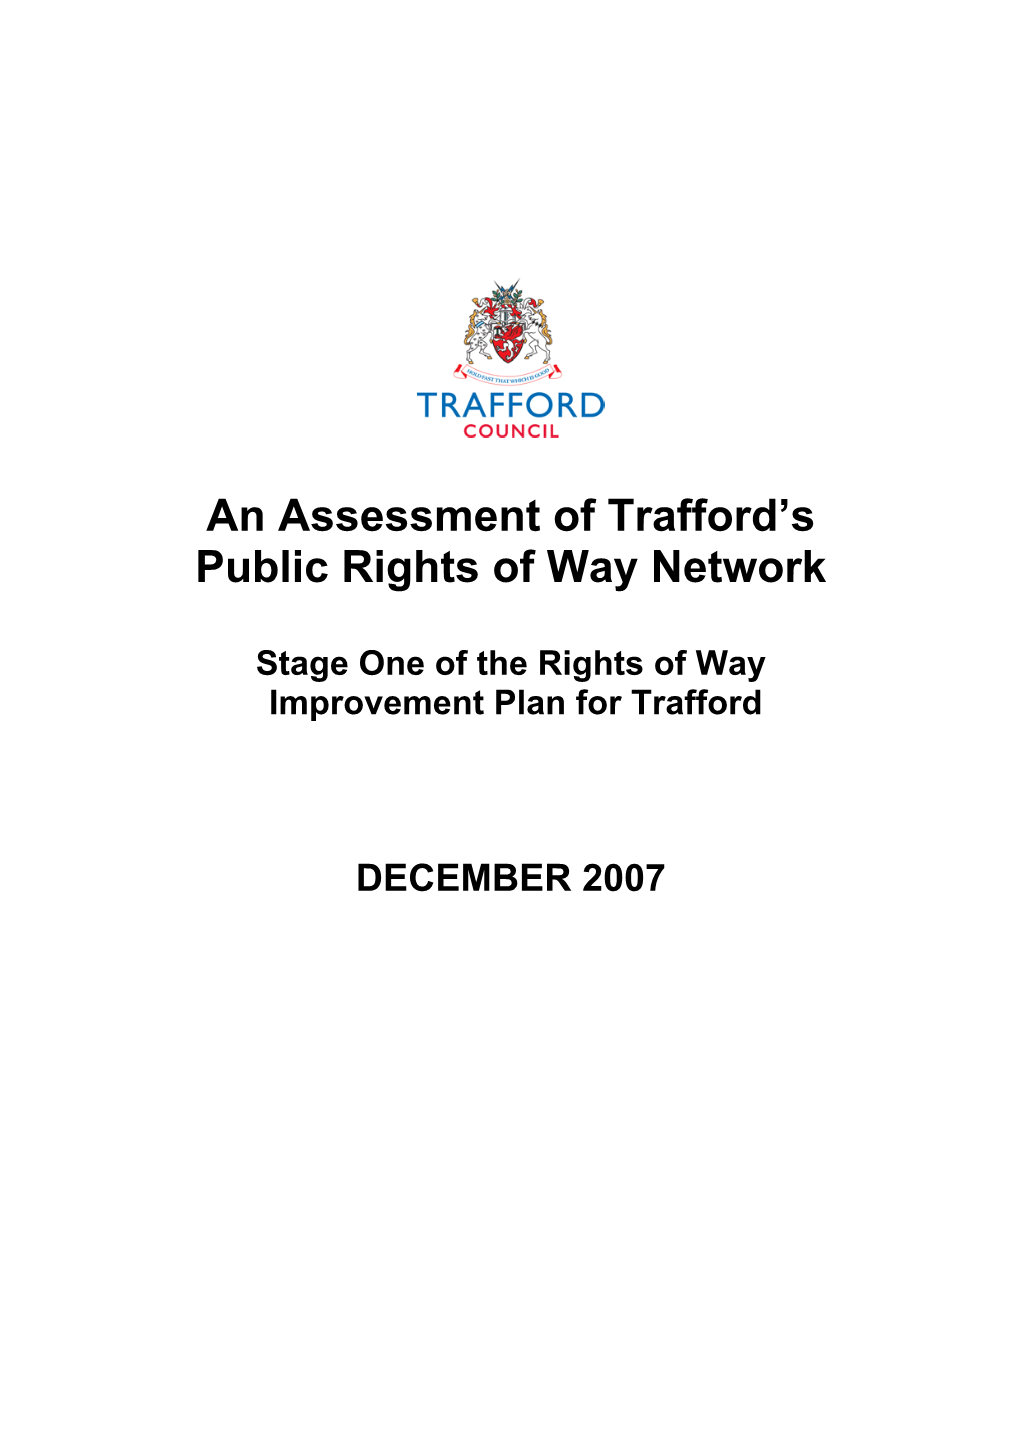 An Assessment of Trafford's Public Rights of Way Network